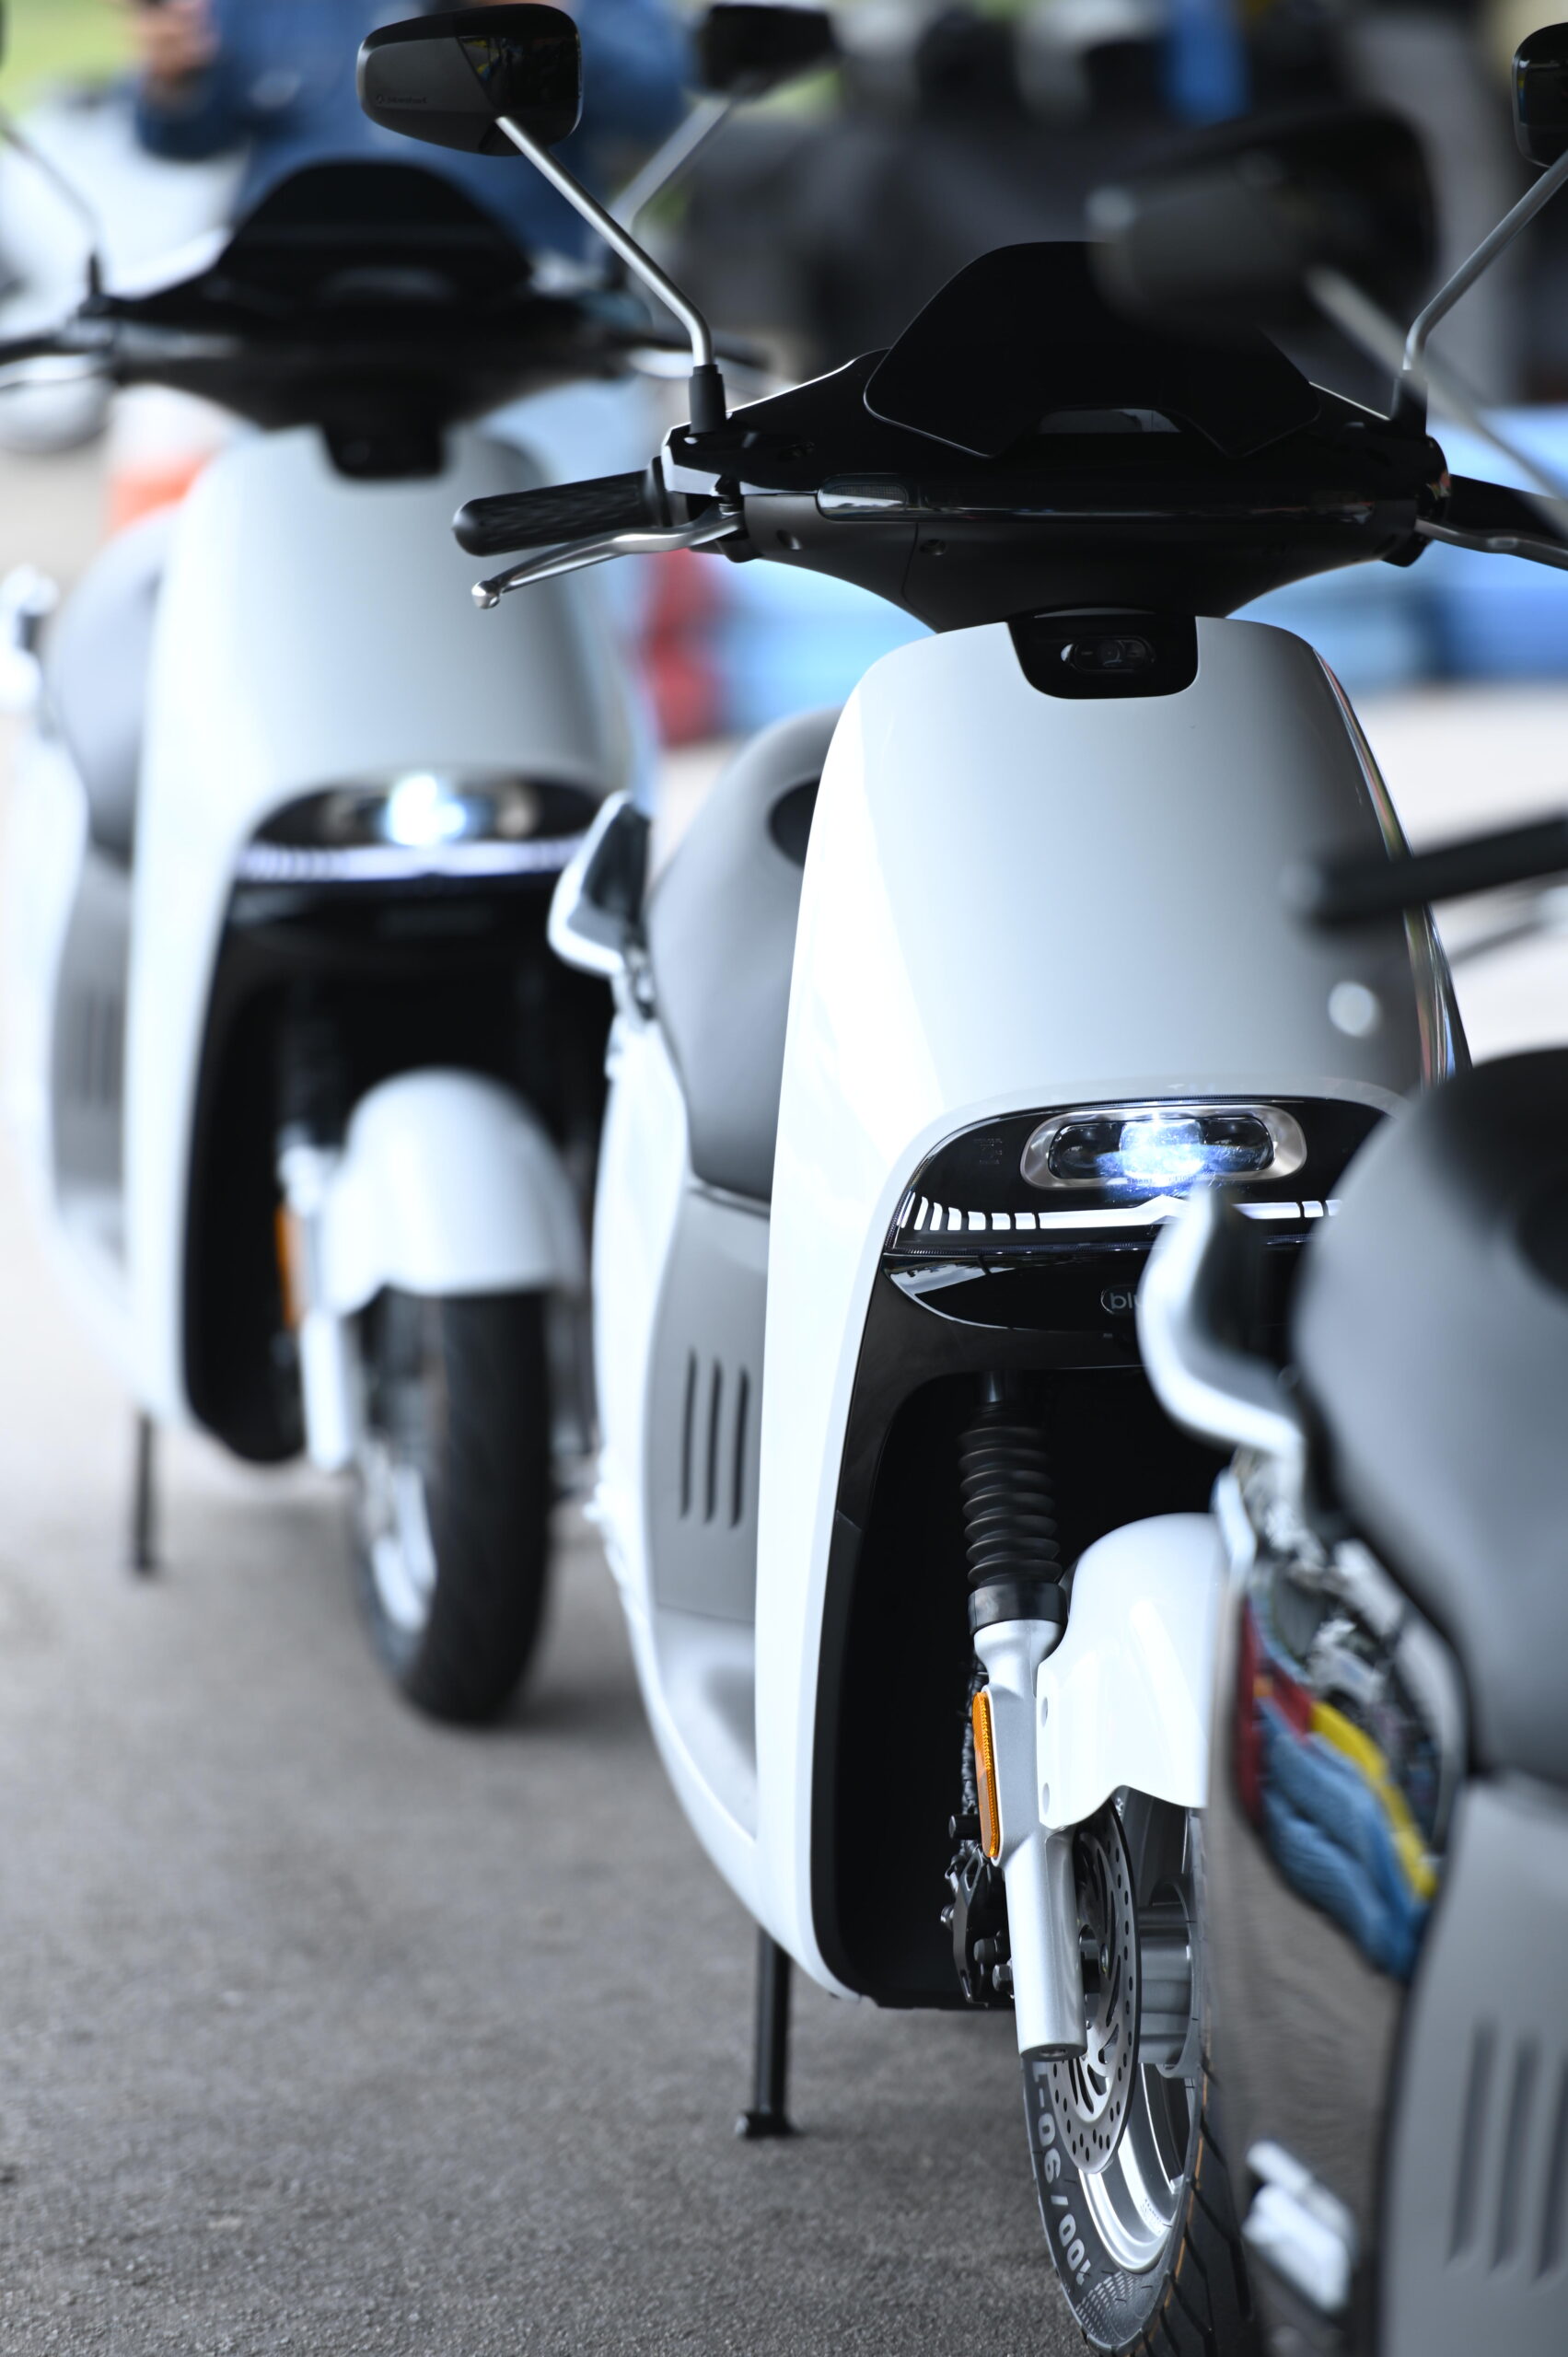 13. Bluesharks smart electric scooter arrives in Malaysia with cutting edge technology to revolutionise urban mobility. scaled